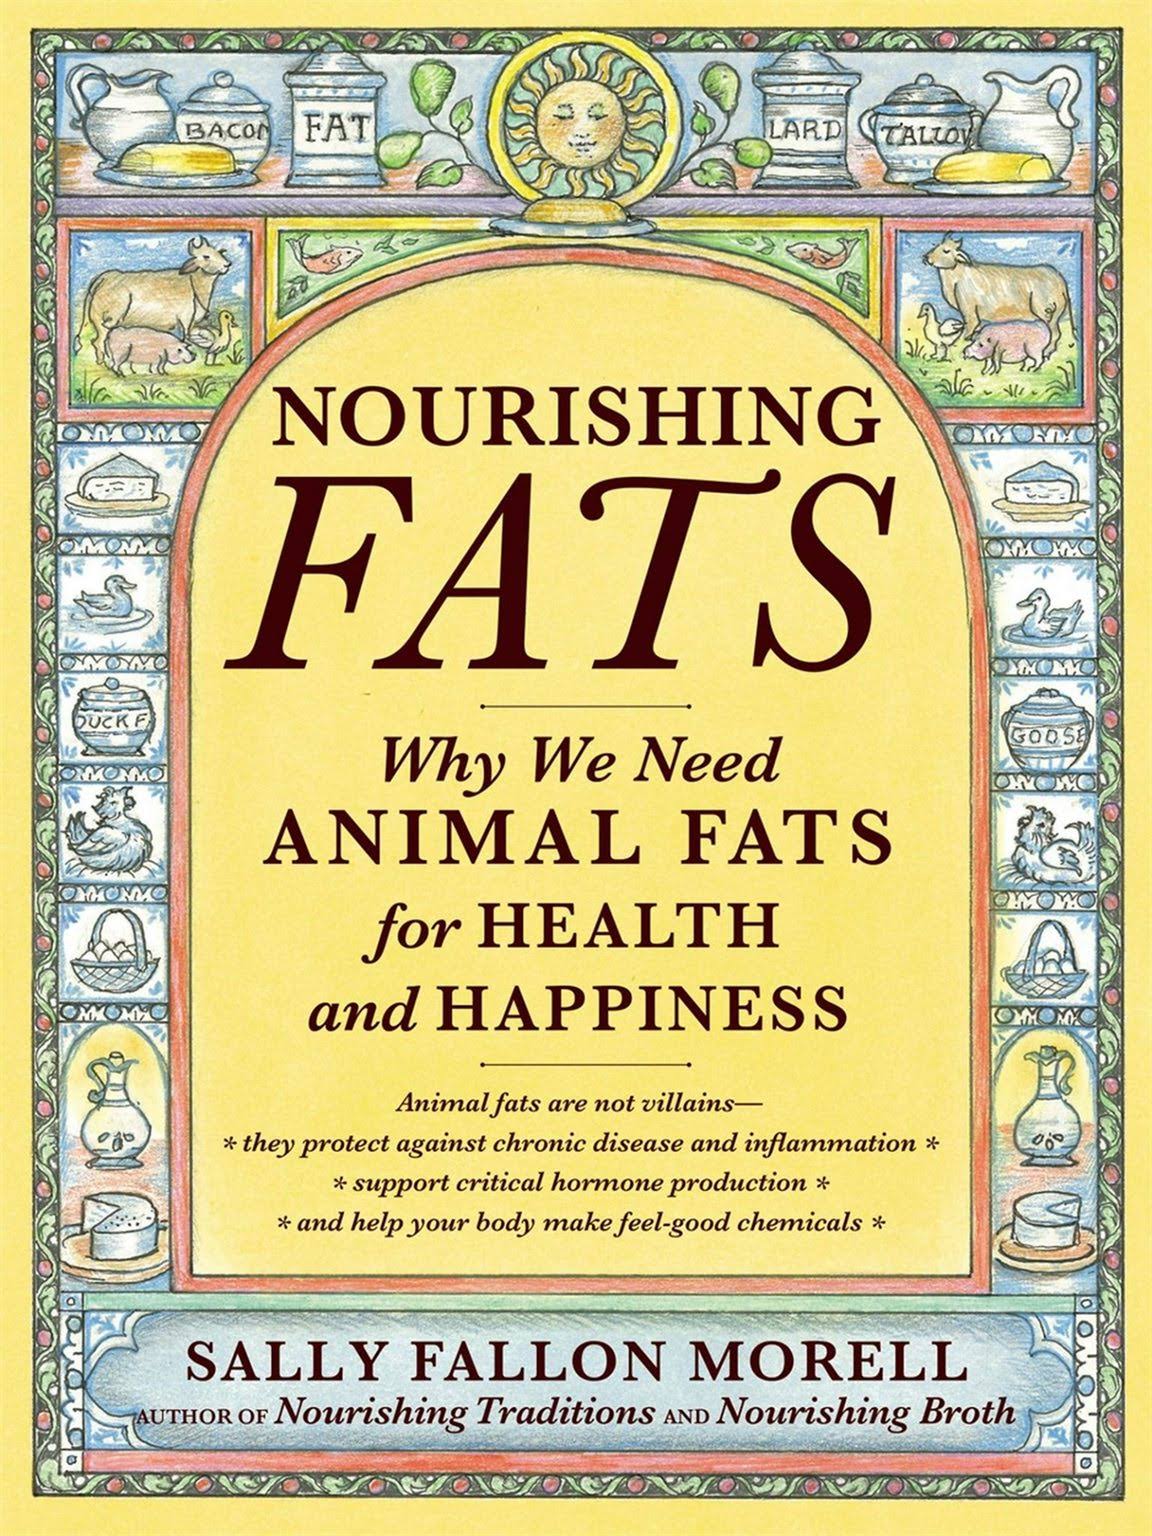 Nourishing Fats: Why We Need Animal Fats for Health and Happiness [Book]